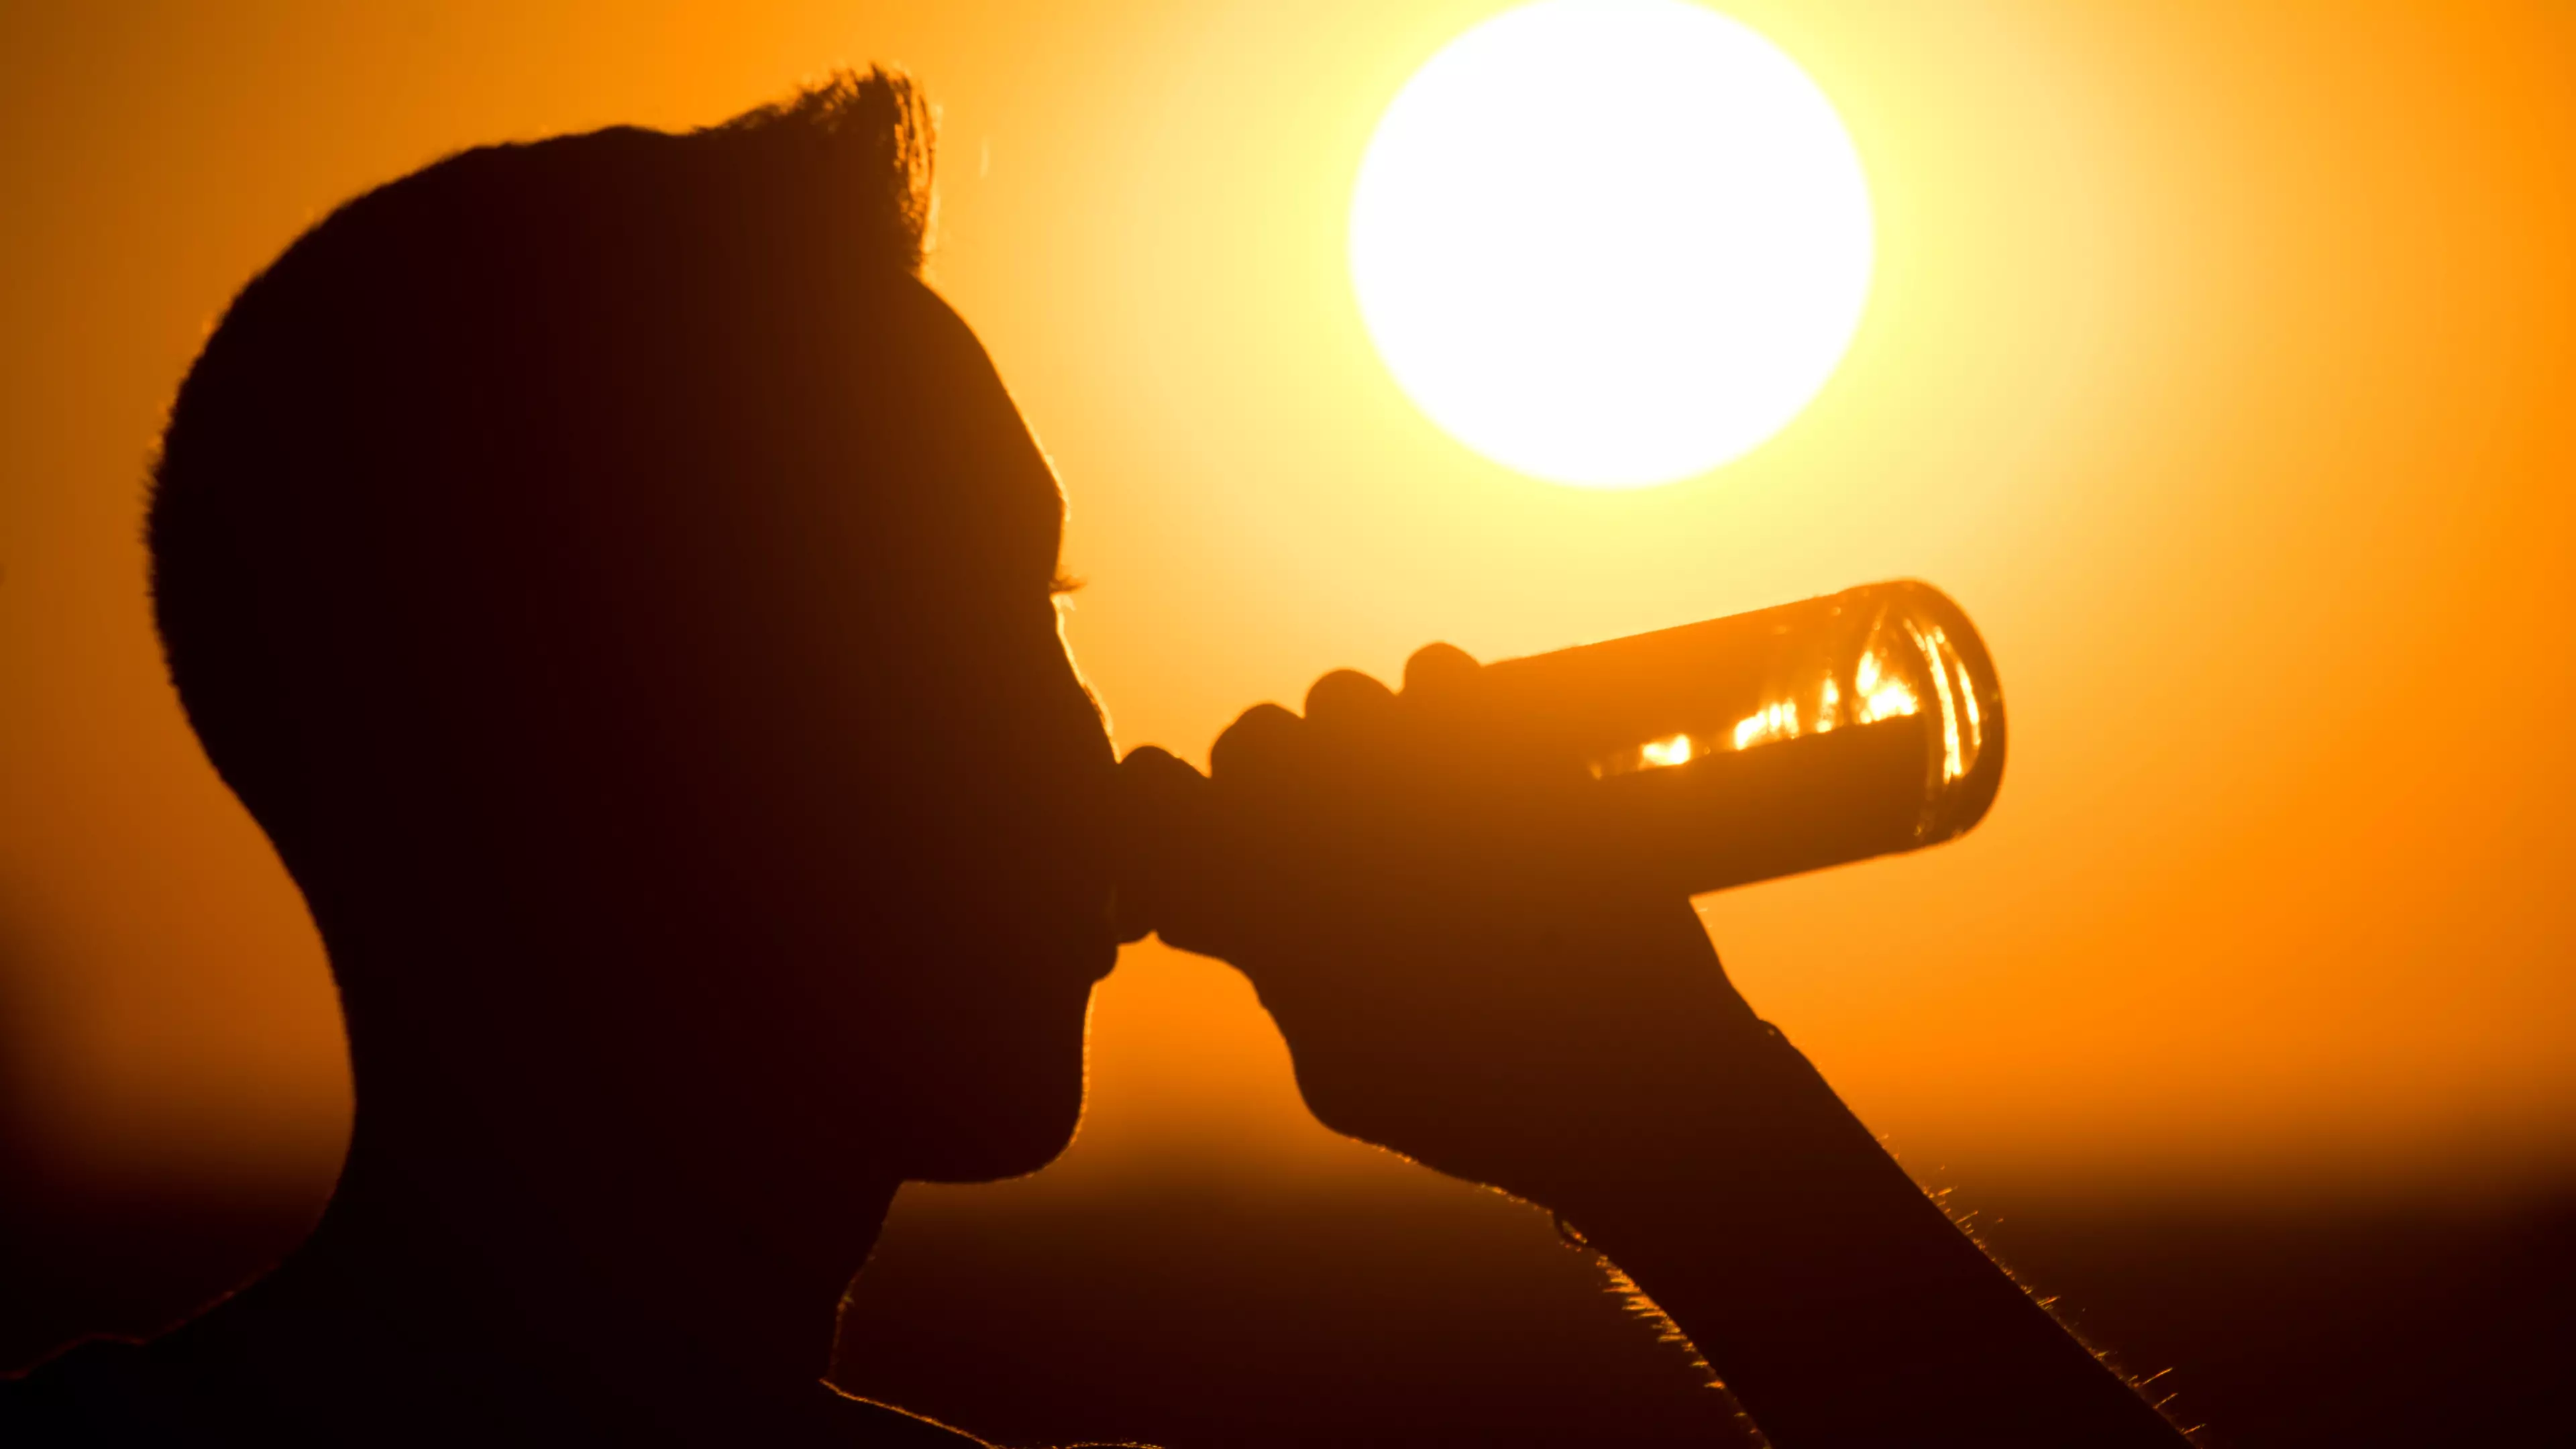 The Heaviest Drinkers In Australia Consume More Than Half The Alcohol In The Country